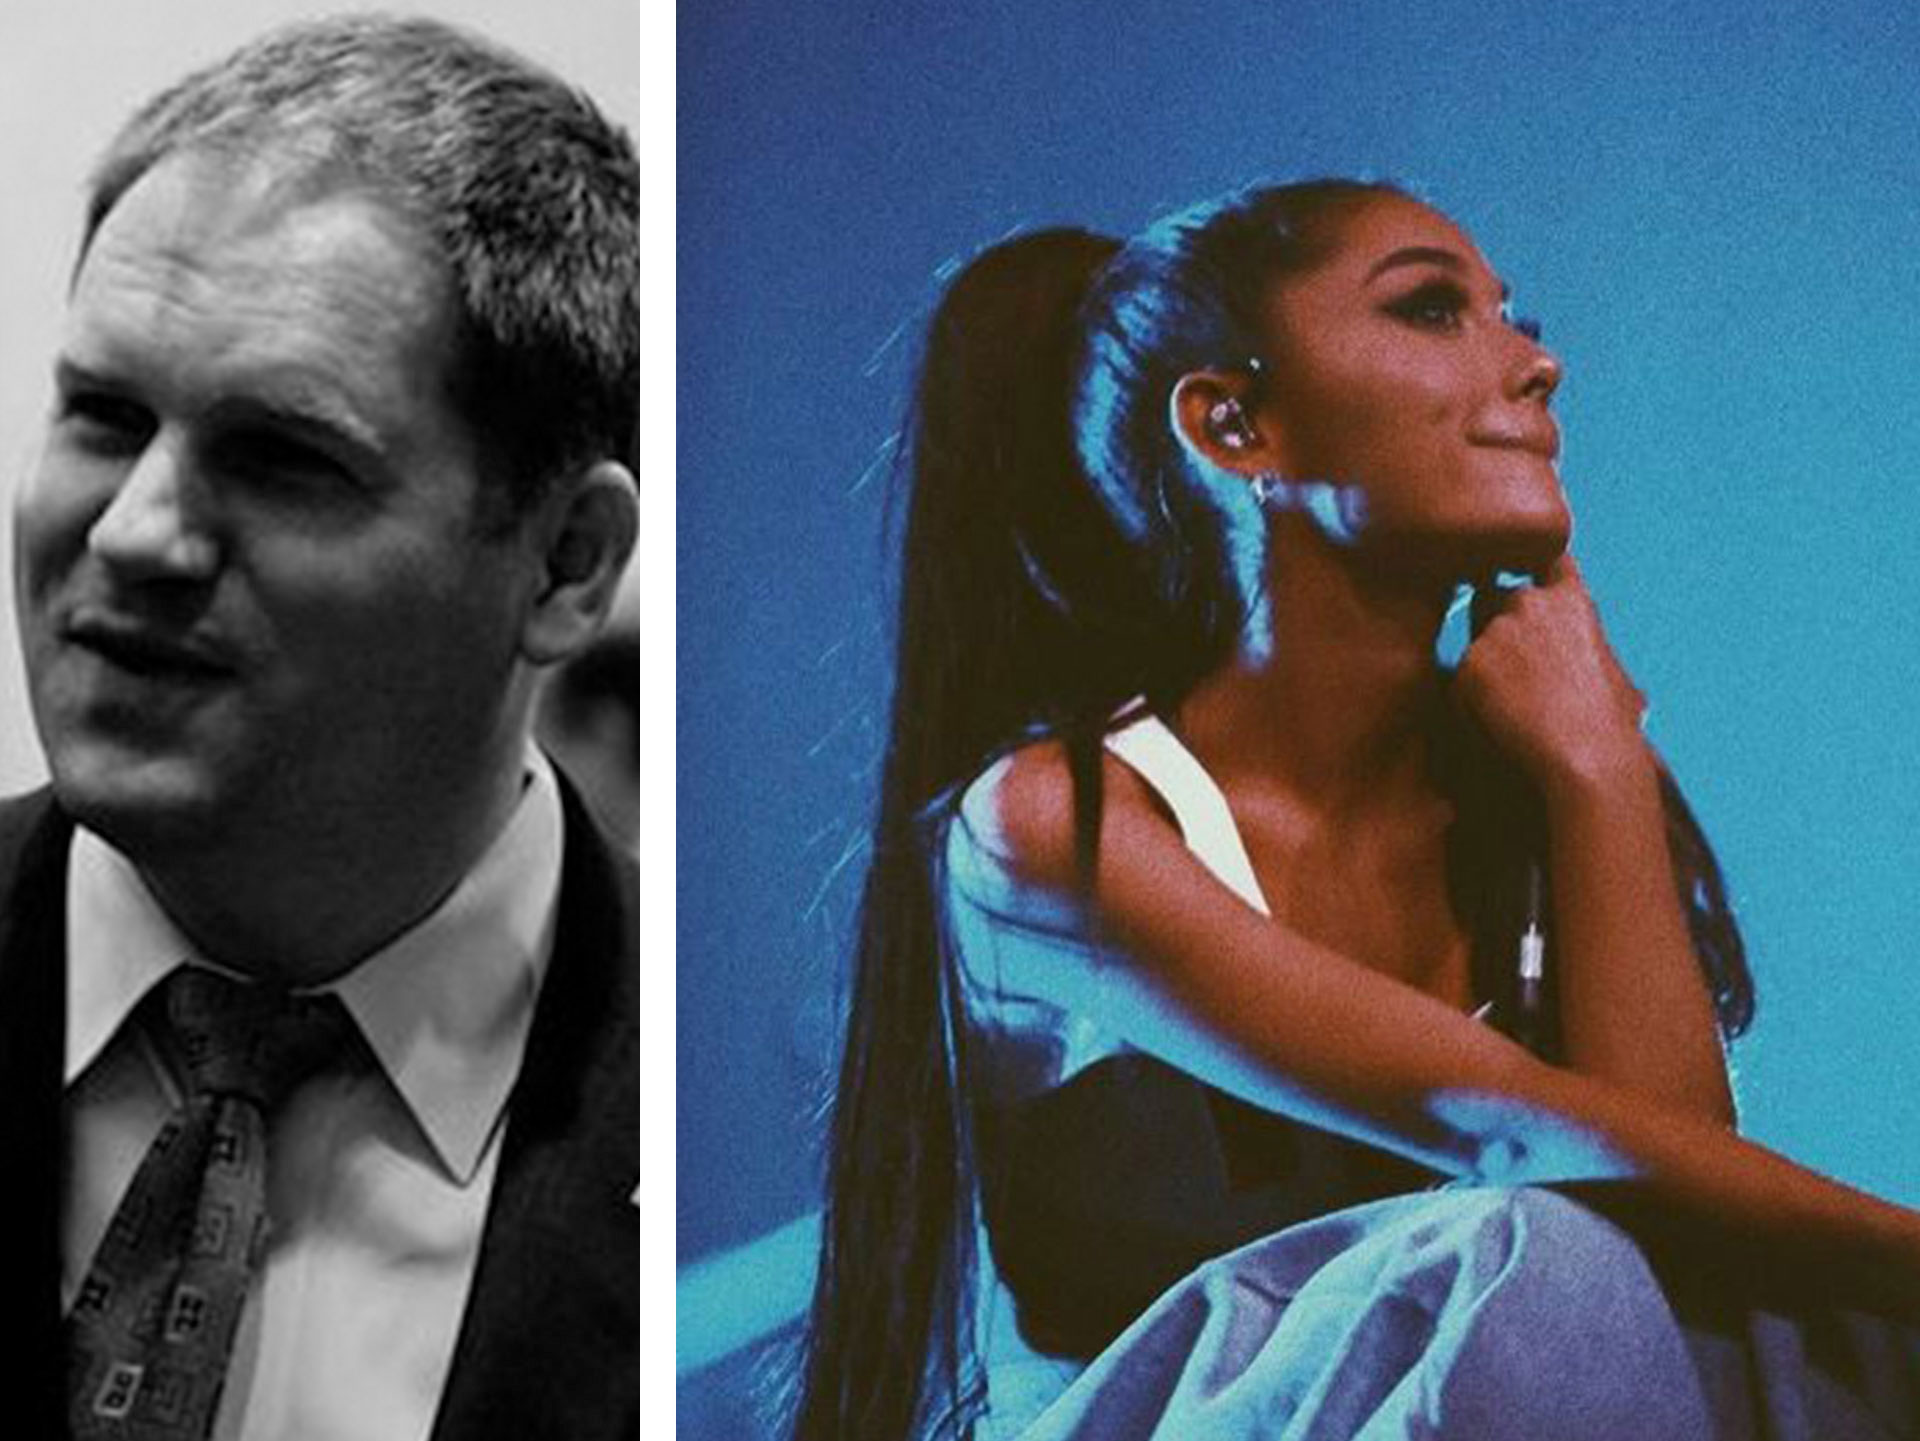 Father-of-three pens heart wrenching open letter to Ariana Grande